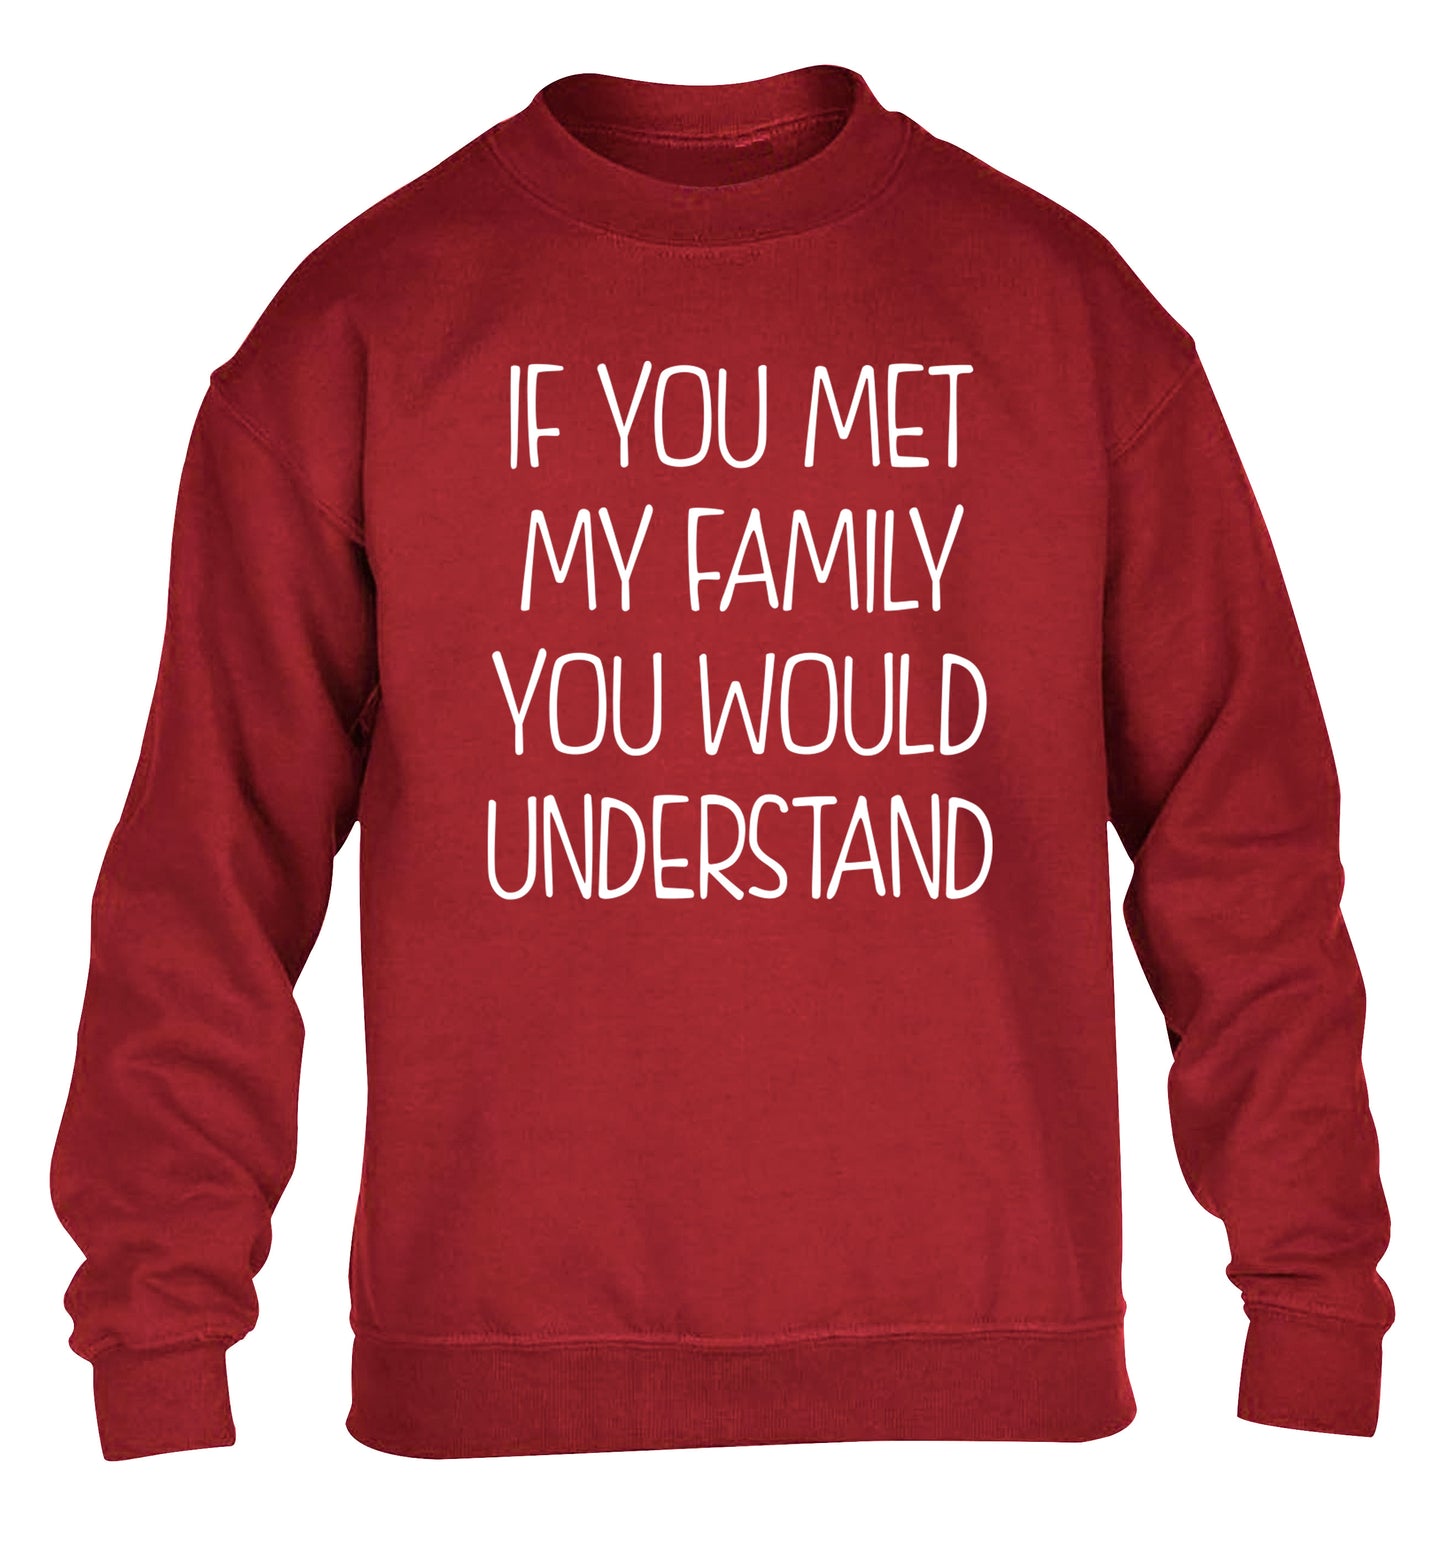 If you met my family you would understand children's grey sweater 12-13 Years